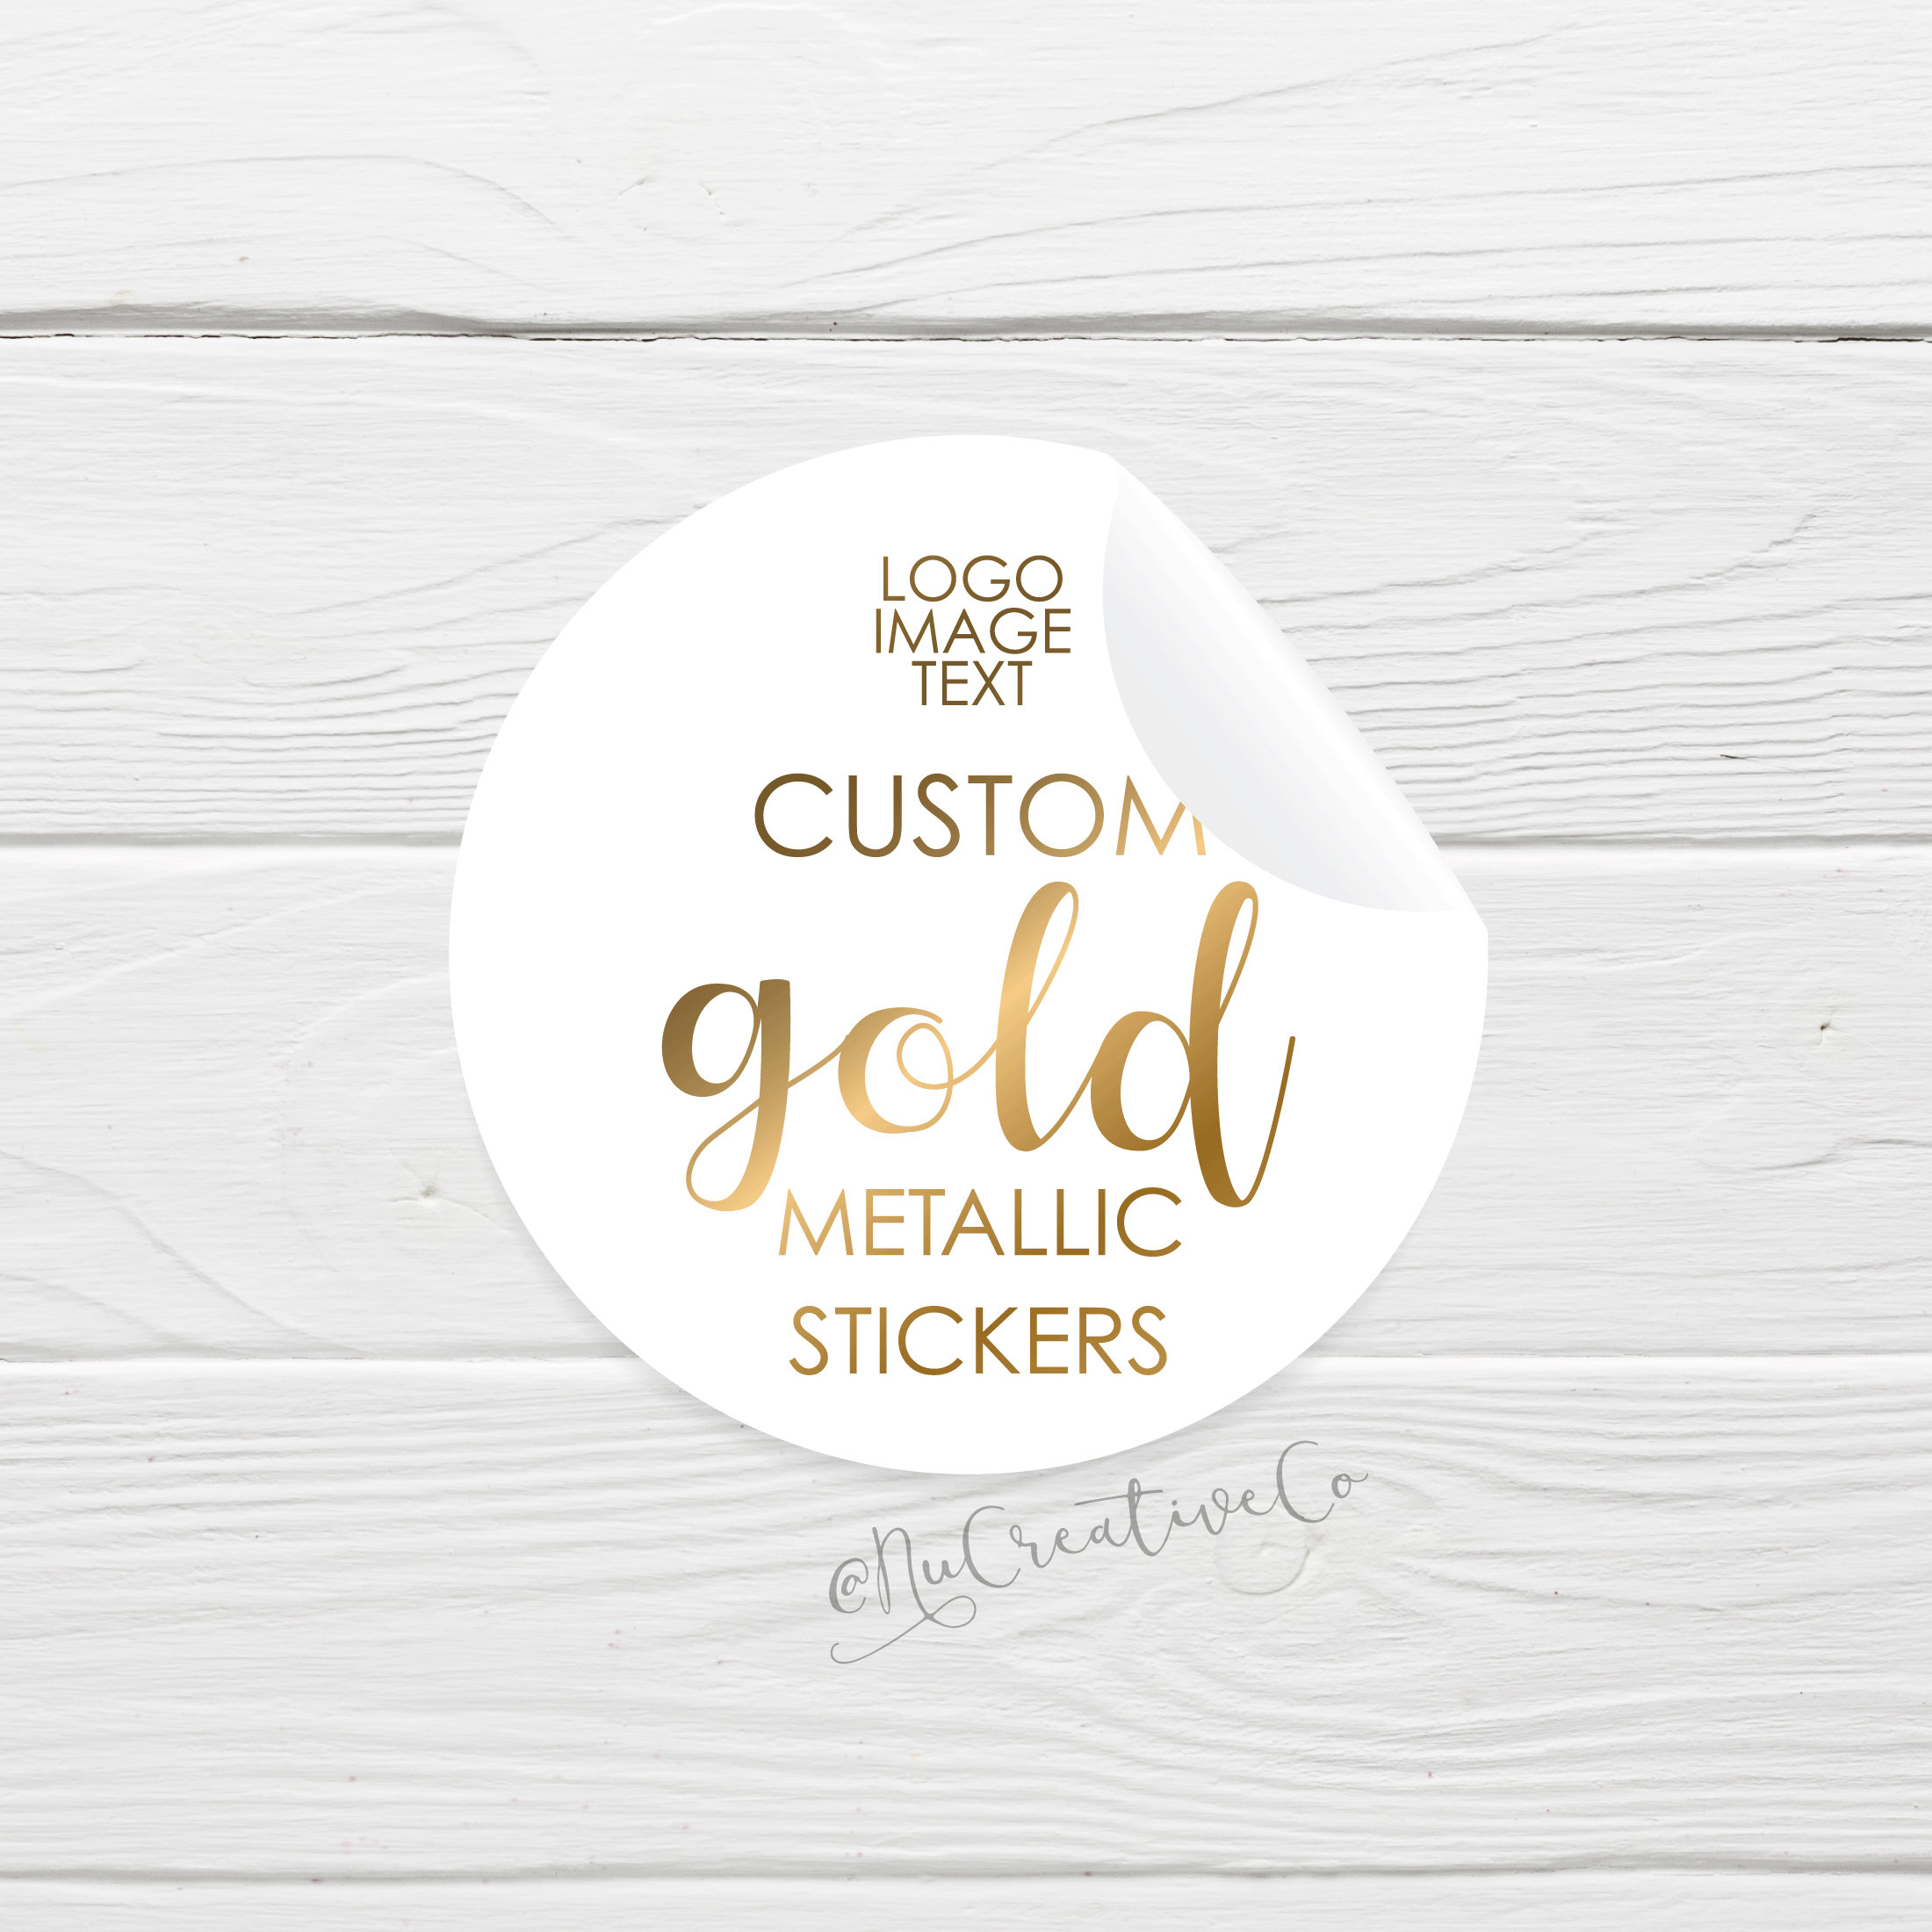 Metallic GOLD Stickers, Foil on White, Custom Gold Text Stickers, Round  Event Wedding, Text Logo, Vinyl See PHOTOS for More INFO Tbdesigned 